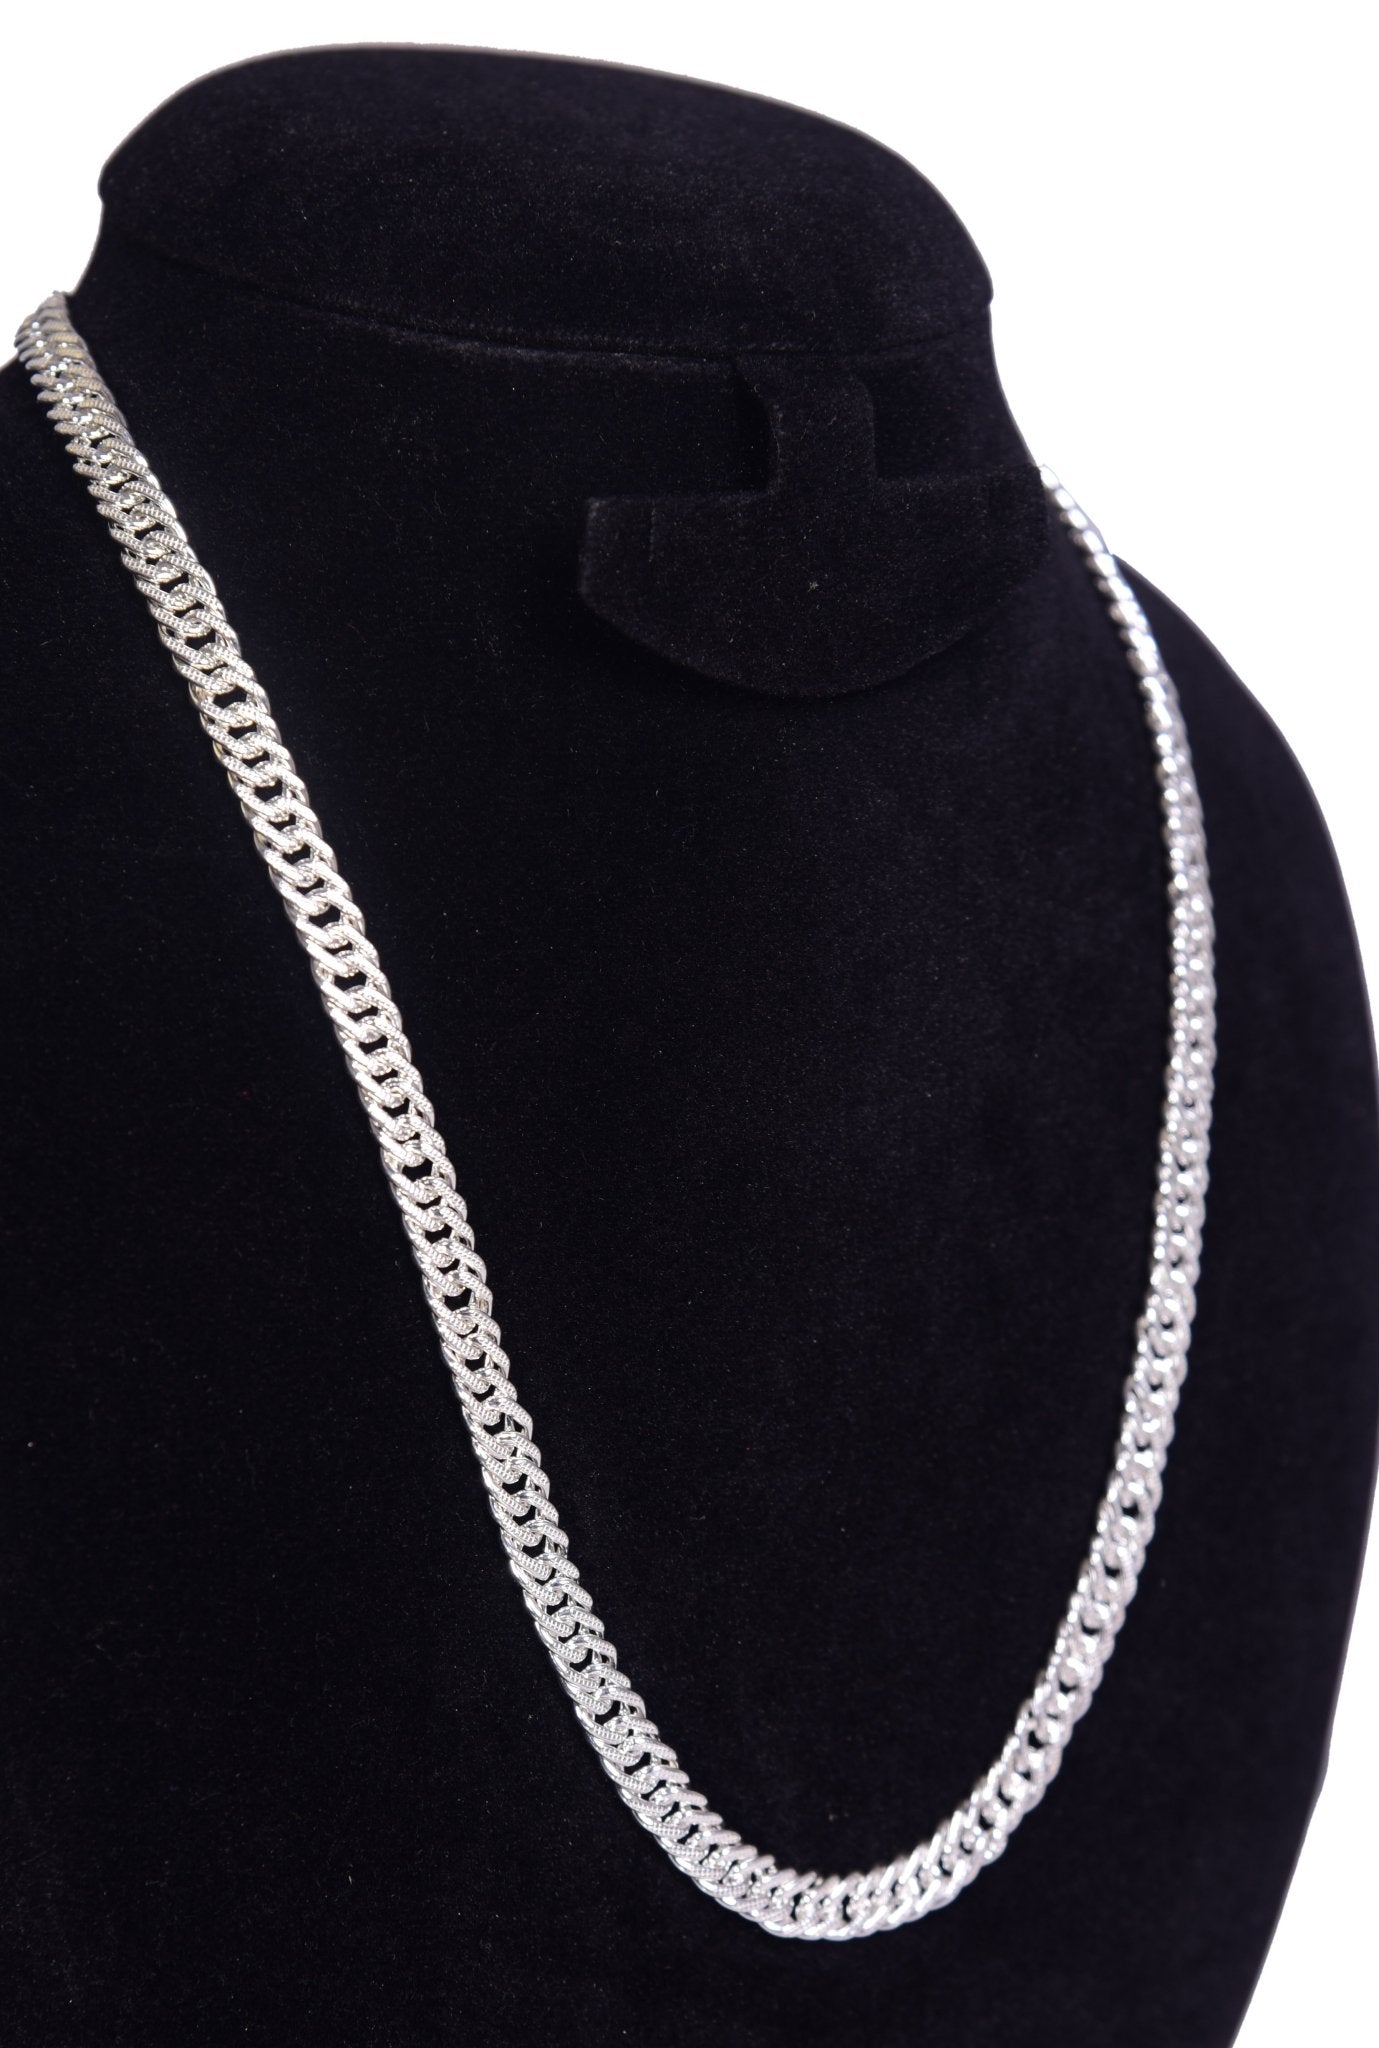 Sophisticated Silver Link Chain | Premium 925 Silver with Rhodium Plating | Men's Necklace - Indique